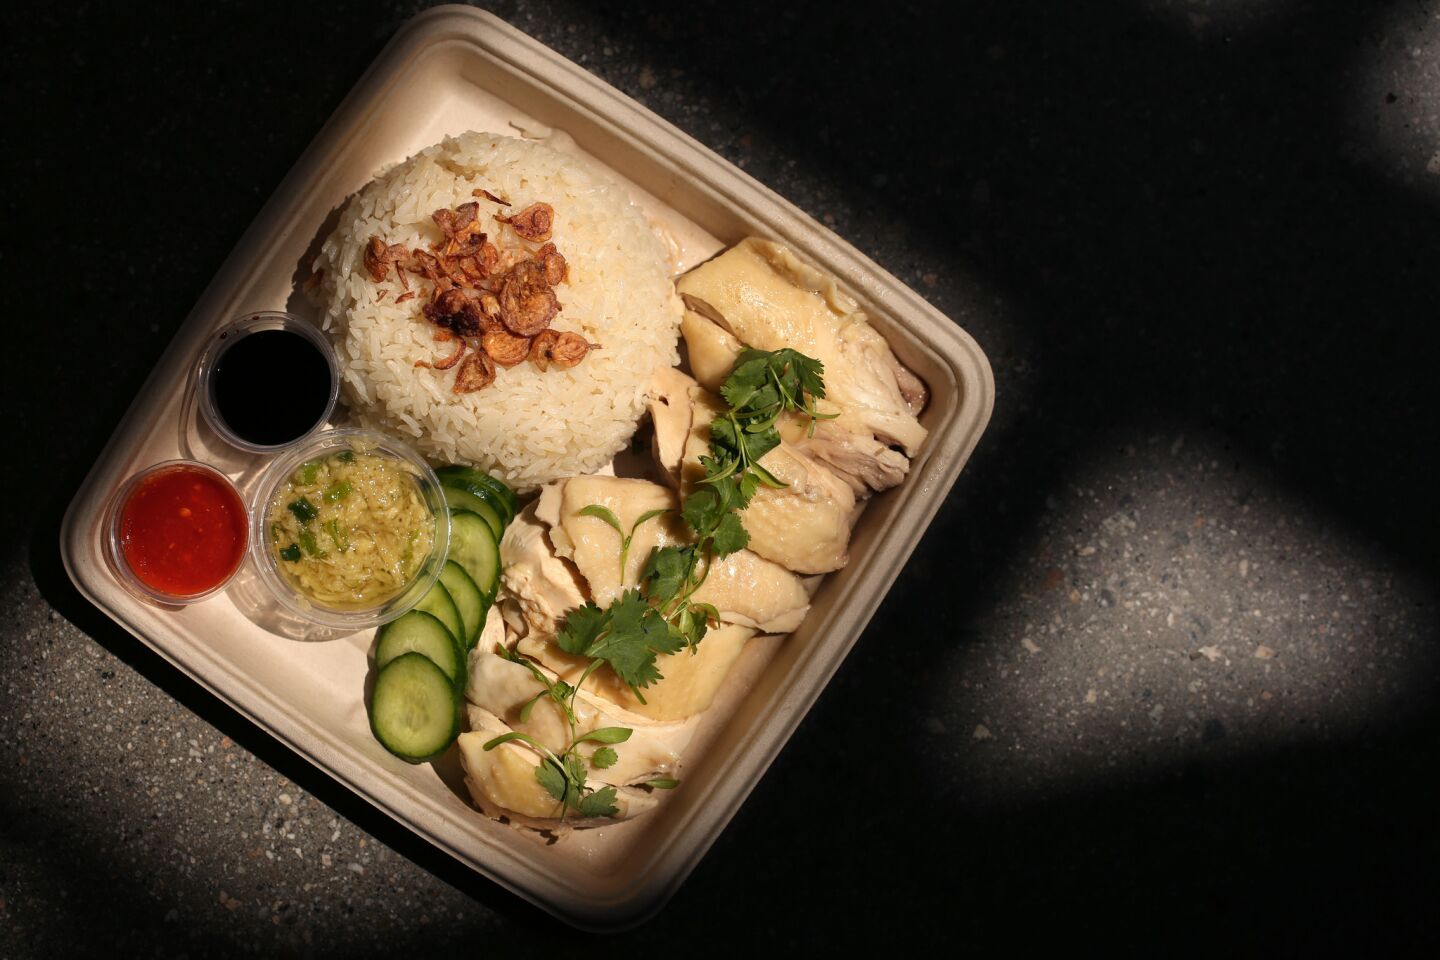 The signature dish at Side Chick is the Hainan chicken rice. The restaurant is located inside the Westfield Santa Anita mall in Arcadia.